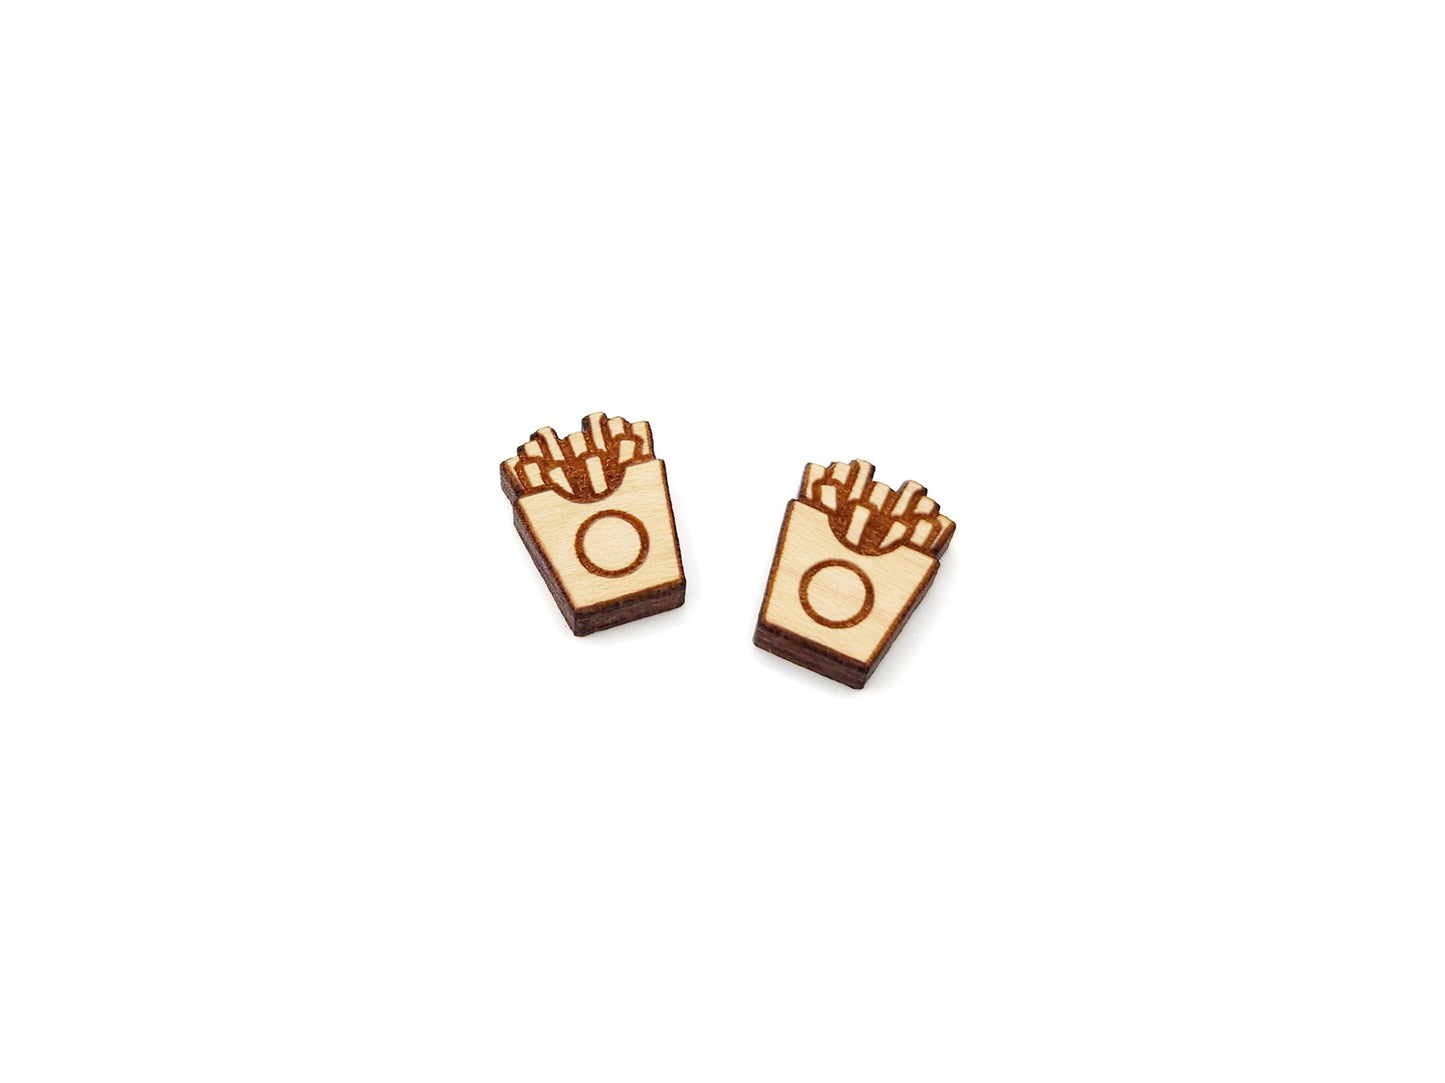 a pair of wooden cabochon stud earring blanks cut and engraved to look like french fries